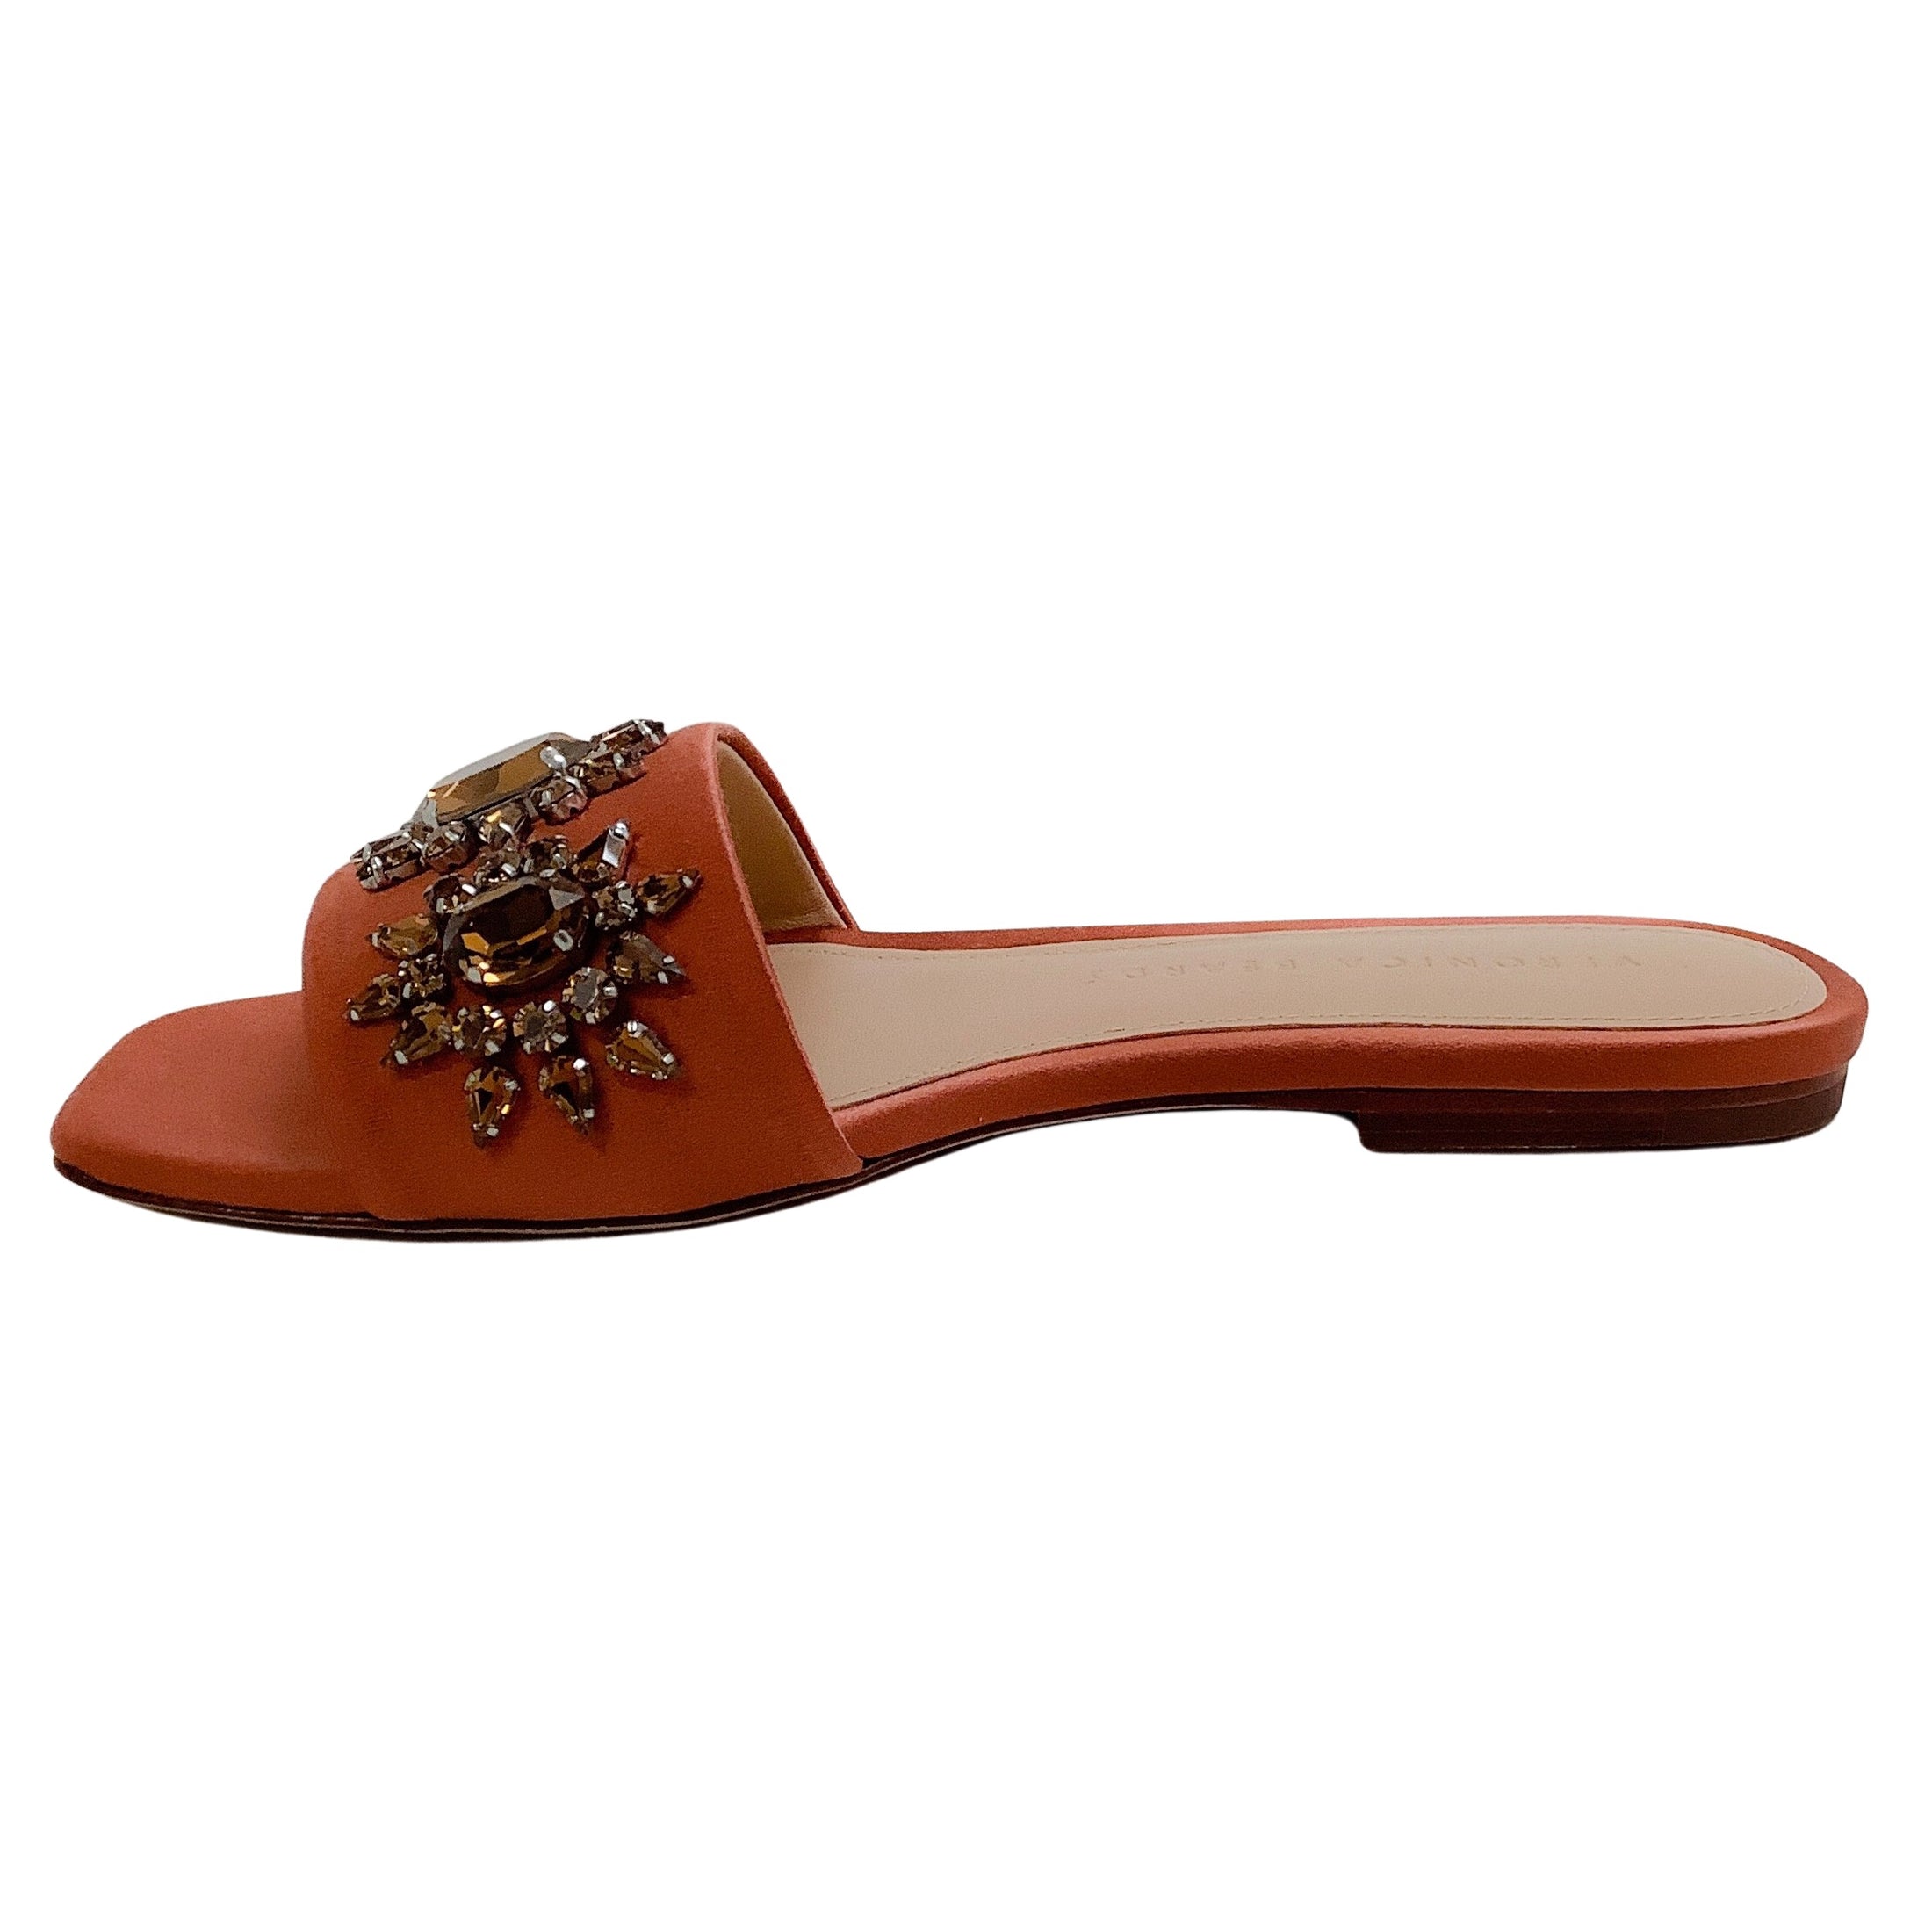 Veronica Beard Redwood Maggie Slides with Crystal Embellishments